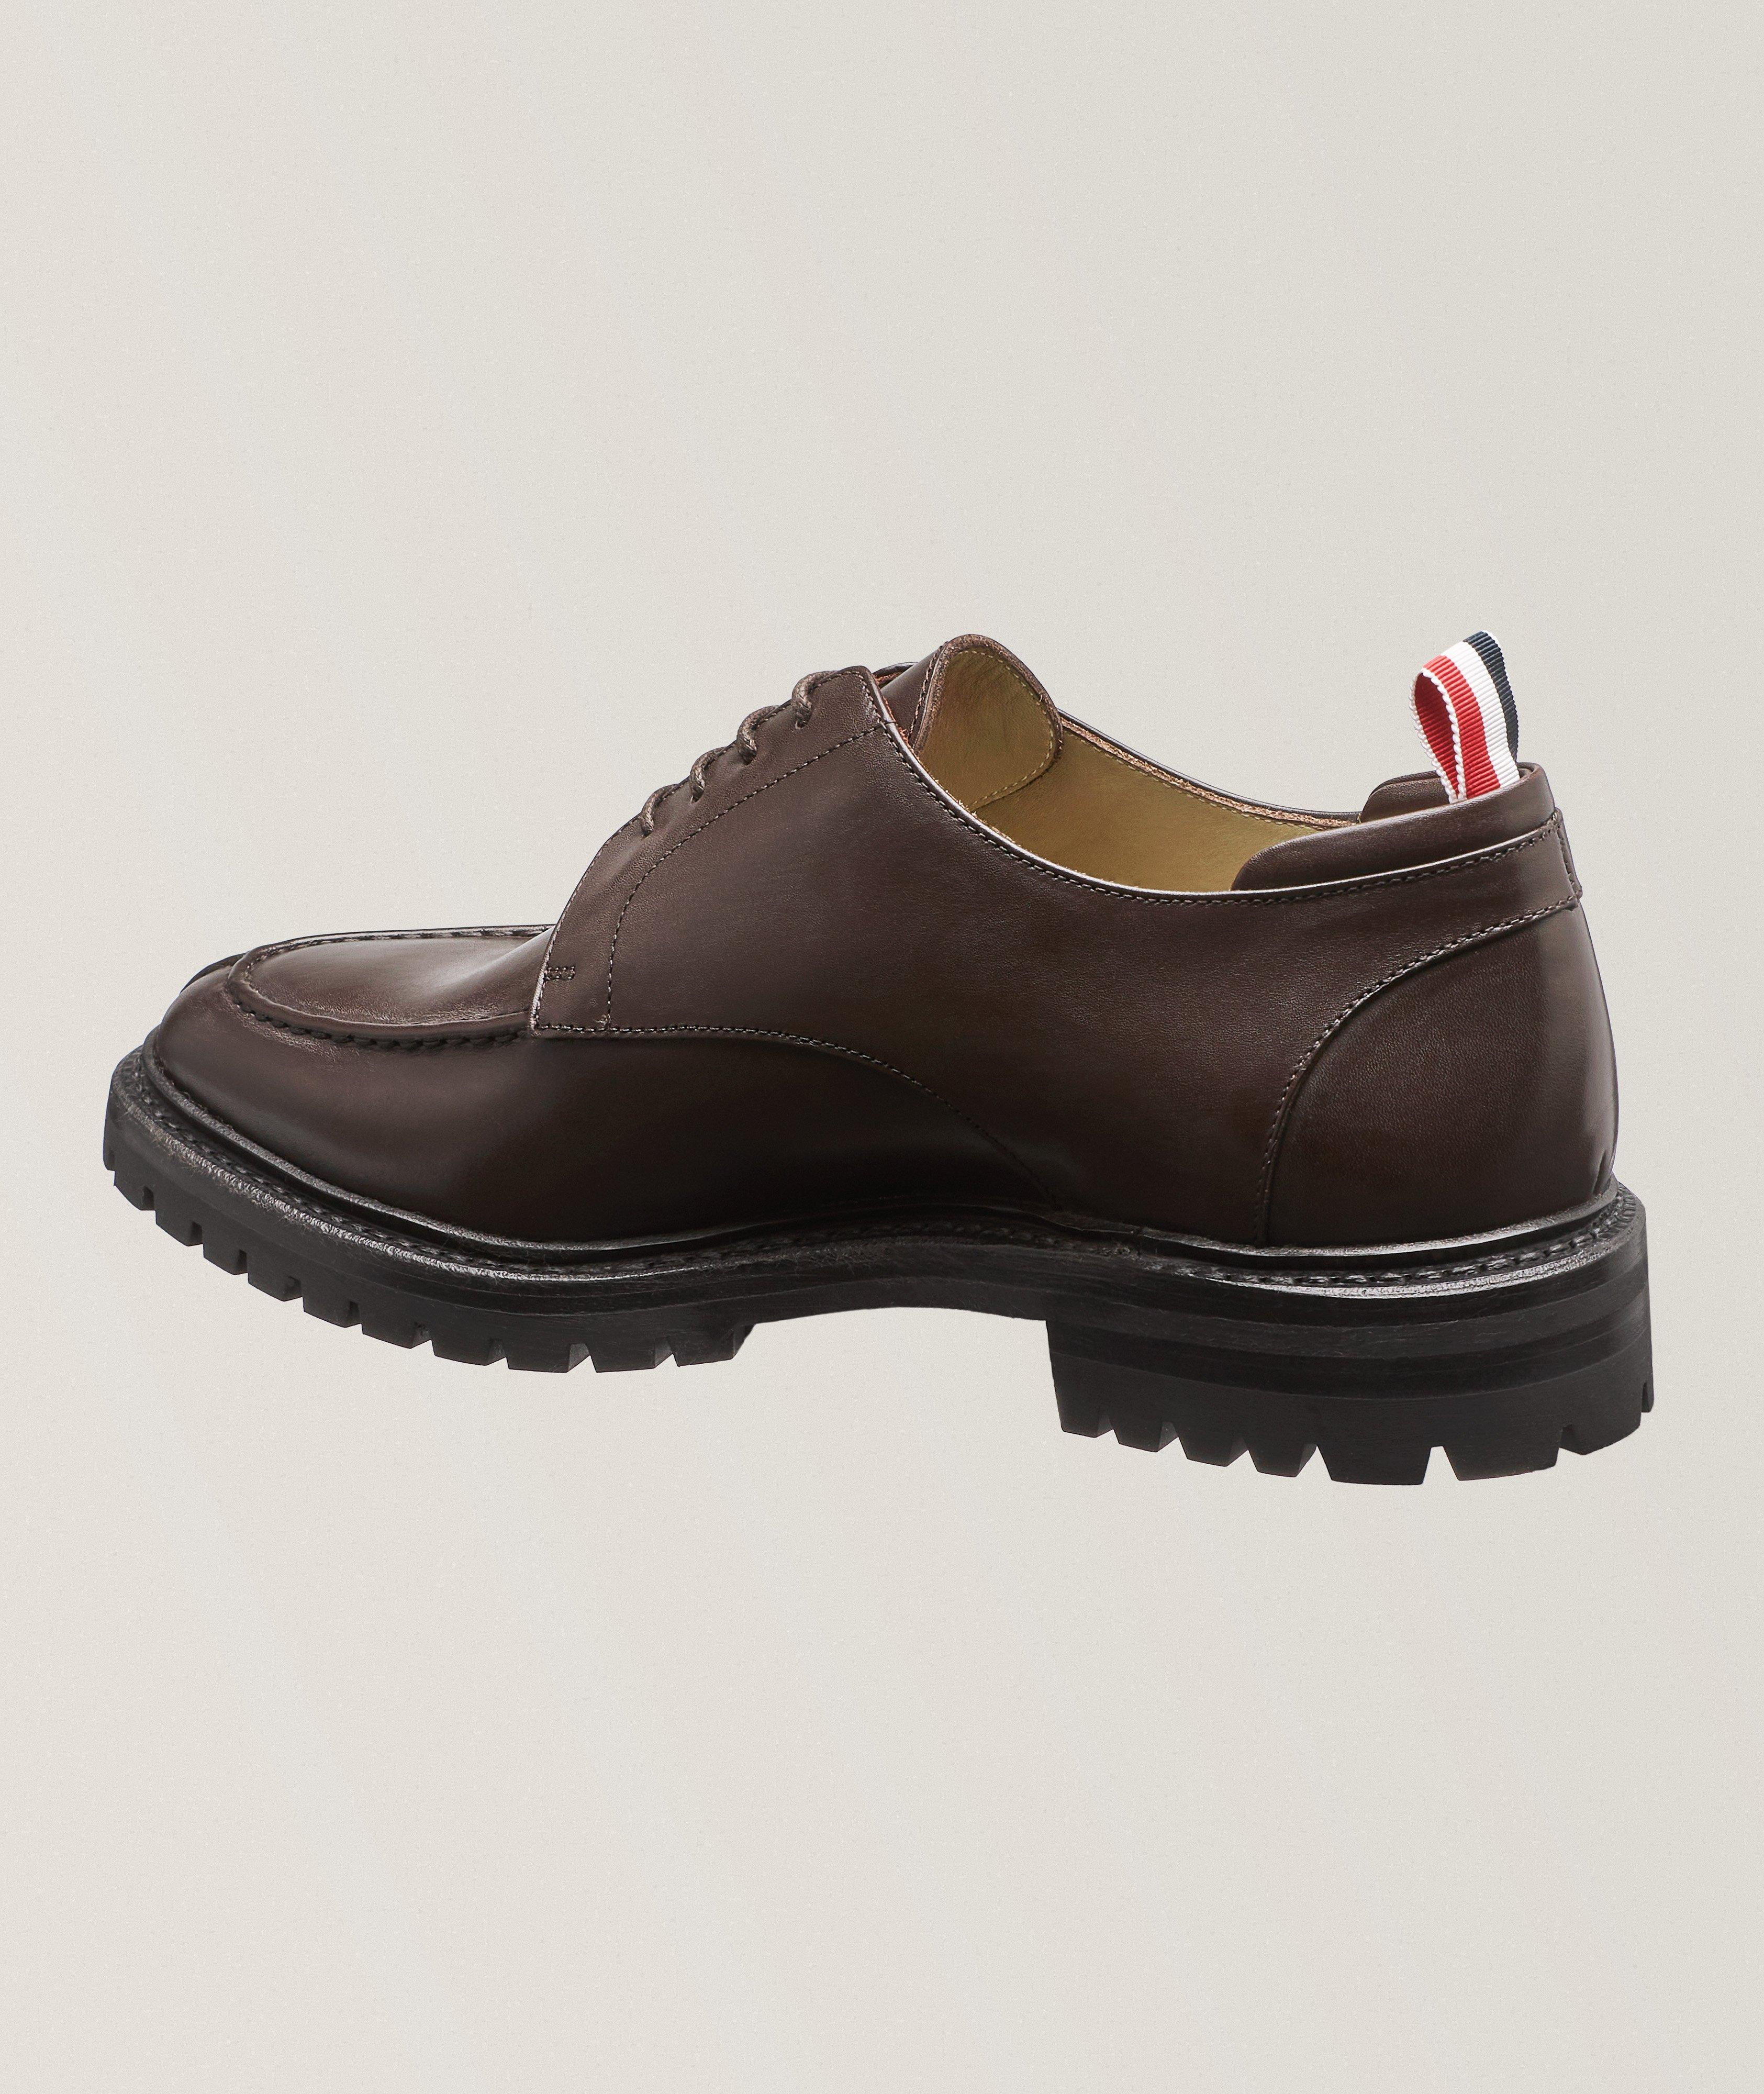 Classic Calf Leather Derbies image 1